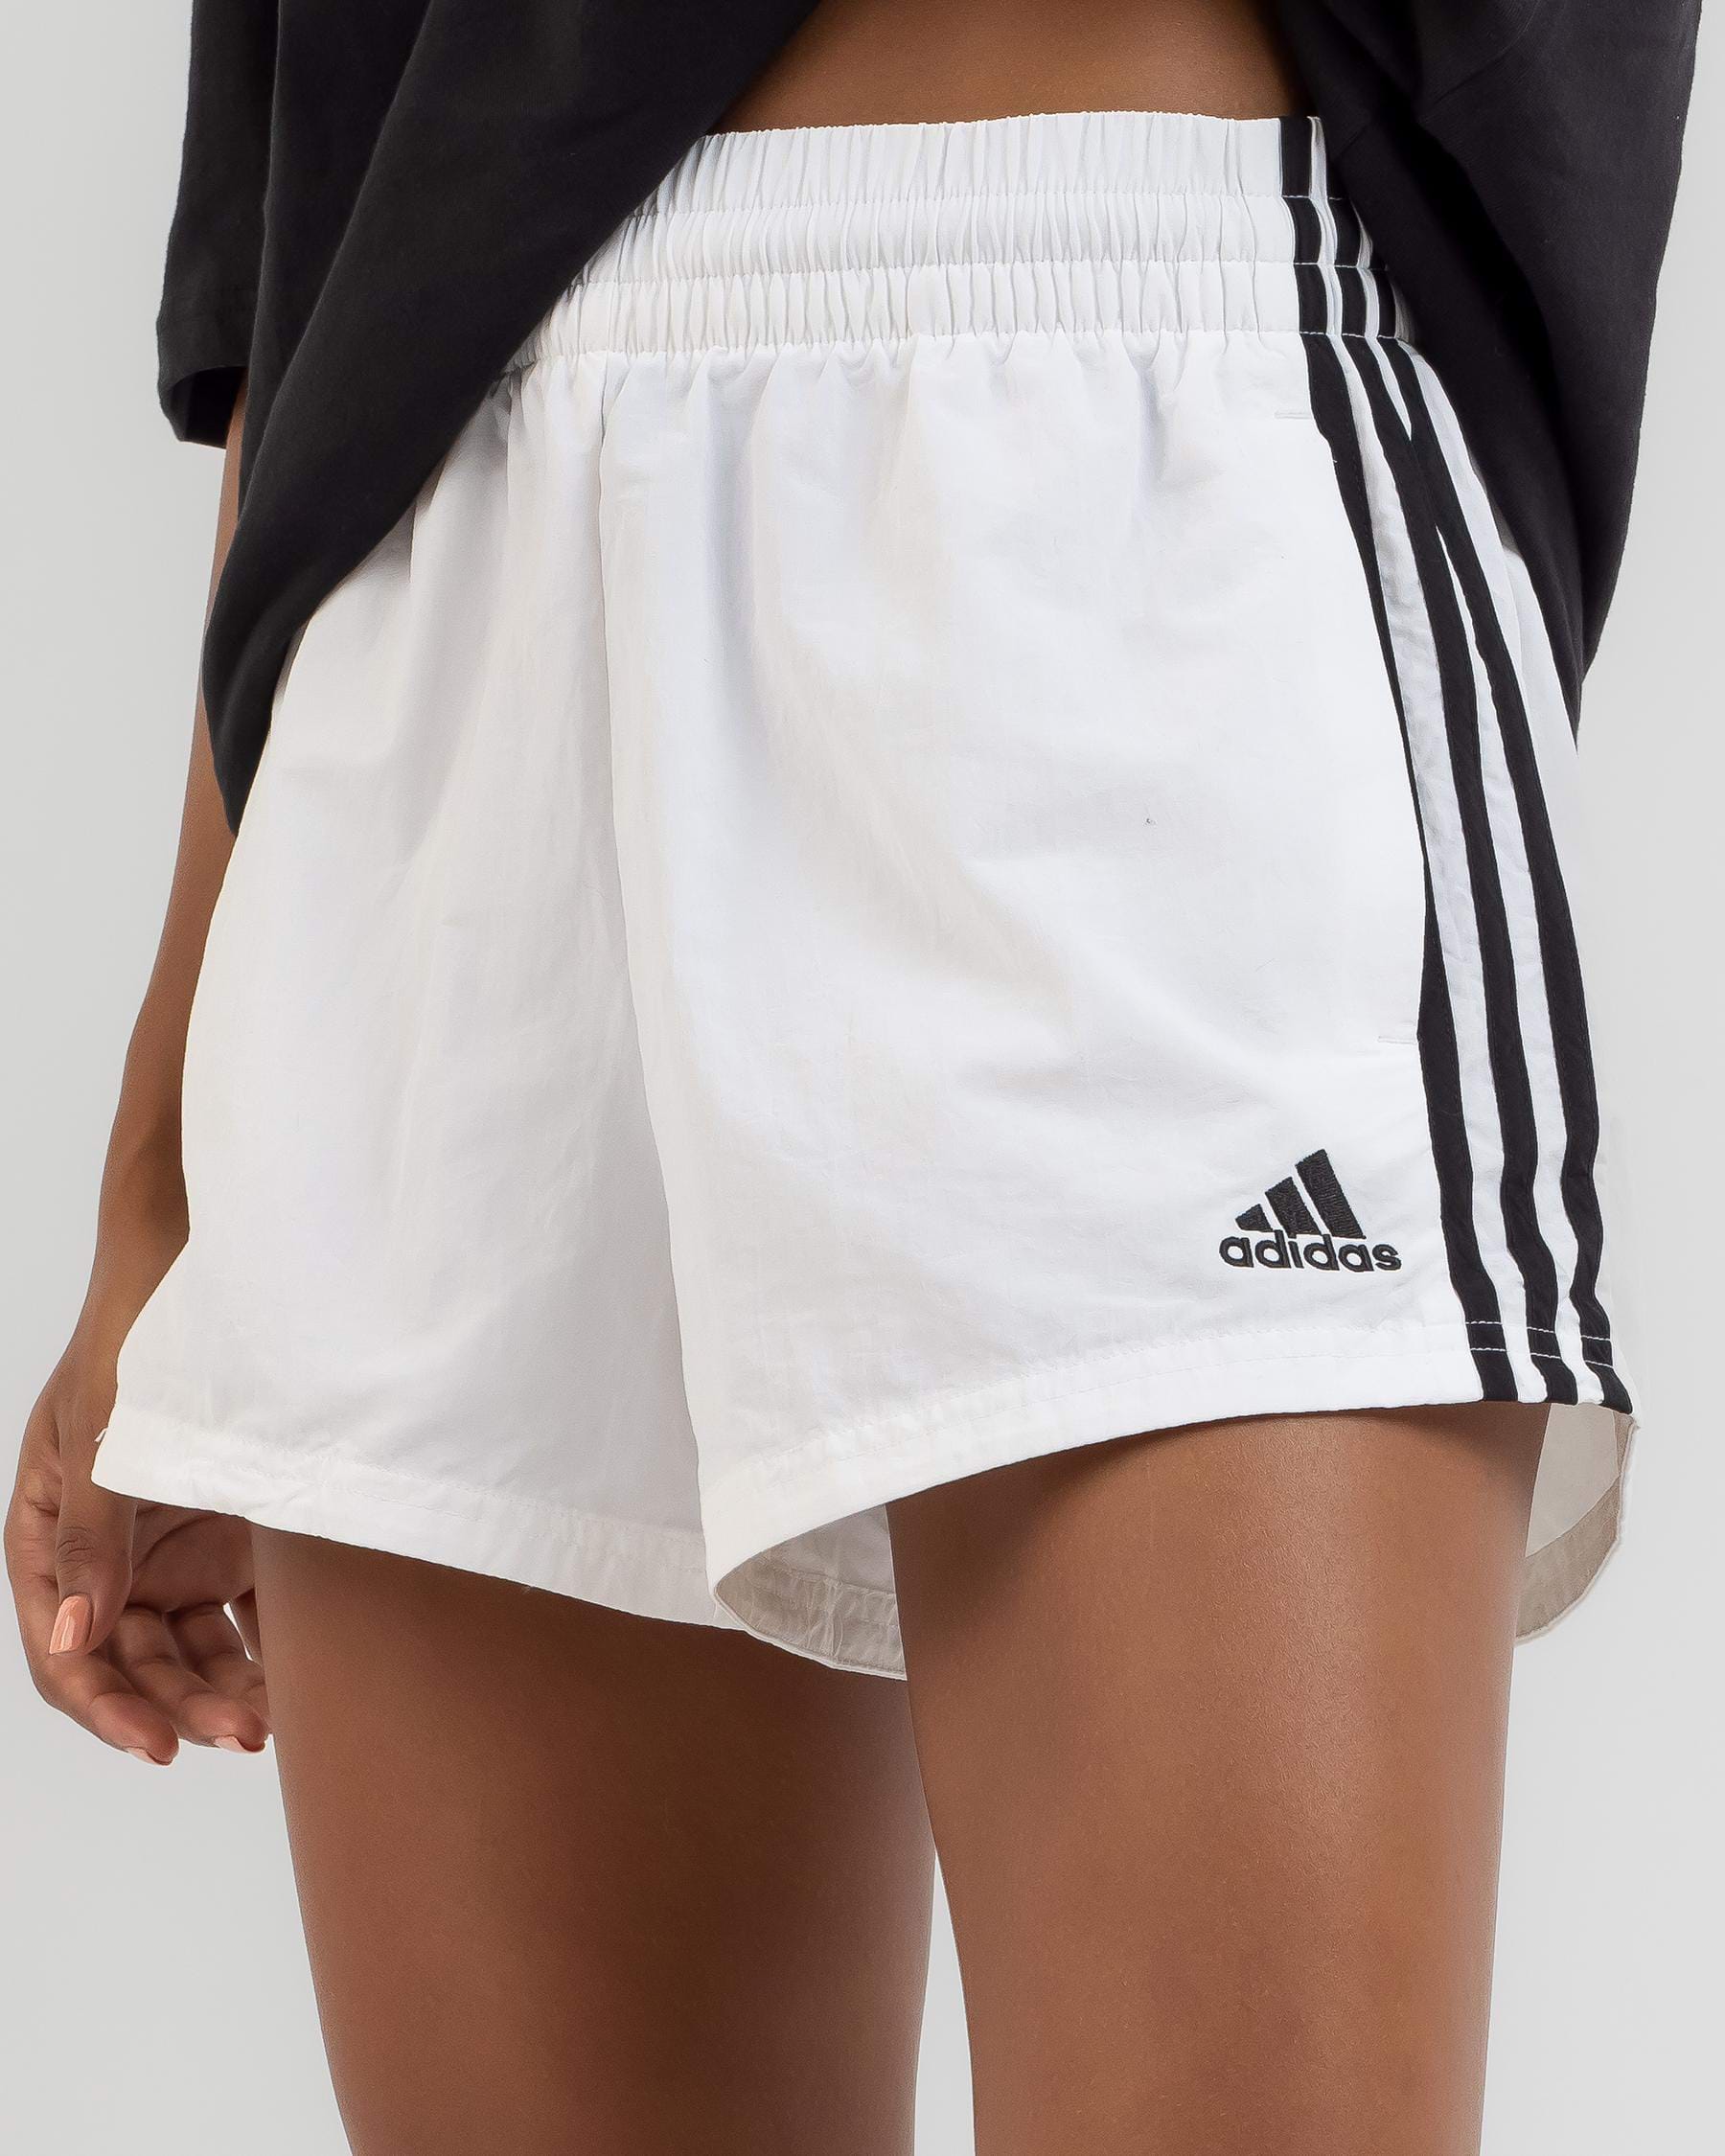 Adidas Essentials Shorts United FREE* - Stripe White/black Easy City States Returns - Shipping In 3 Woven & Beach